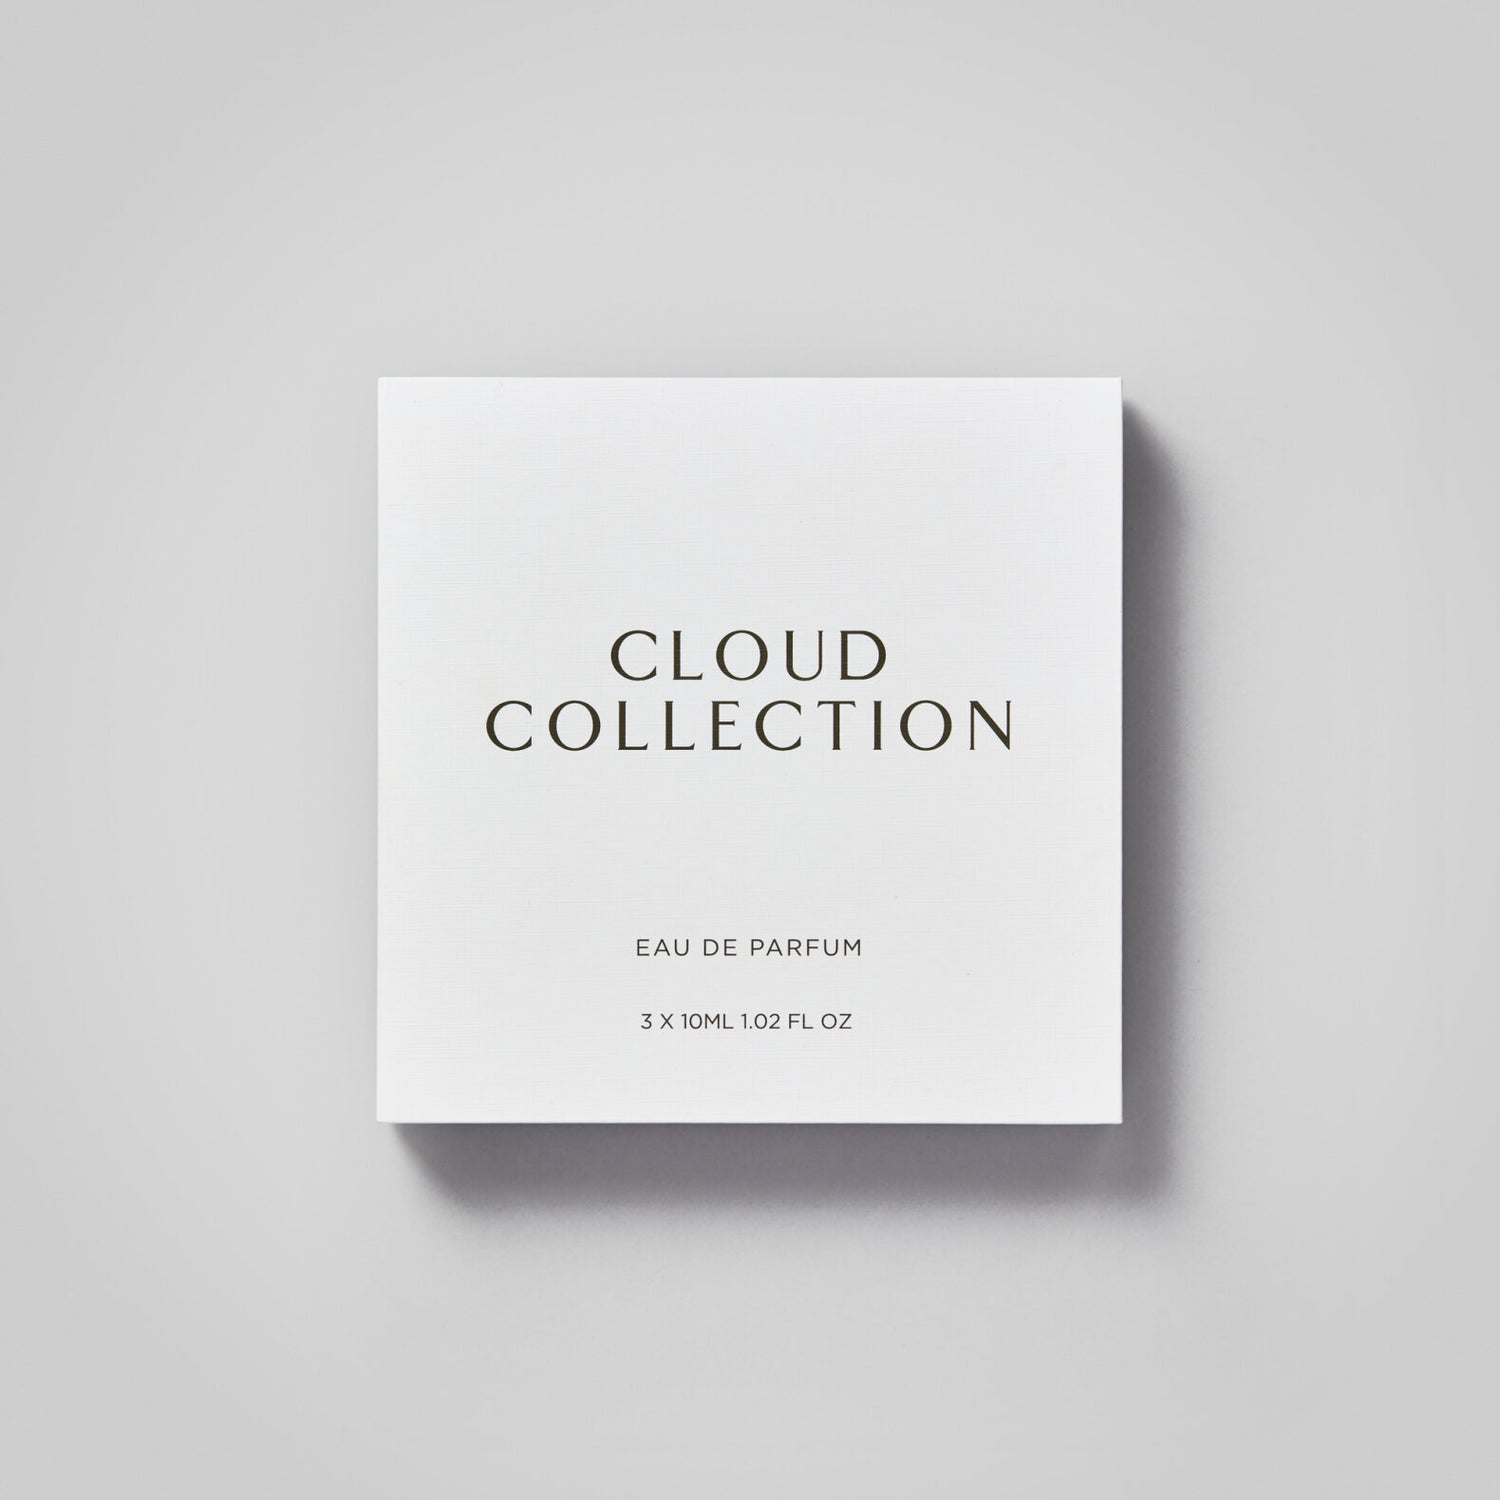 CLOUD COLLECTION BOX